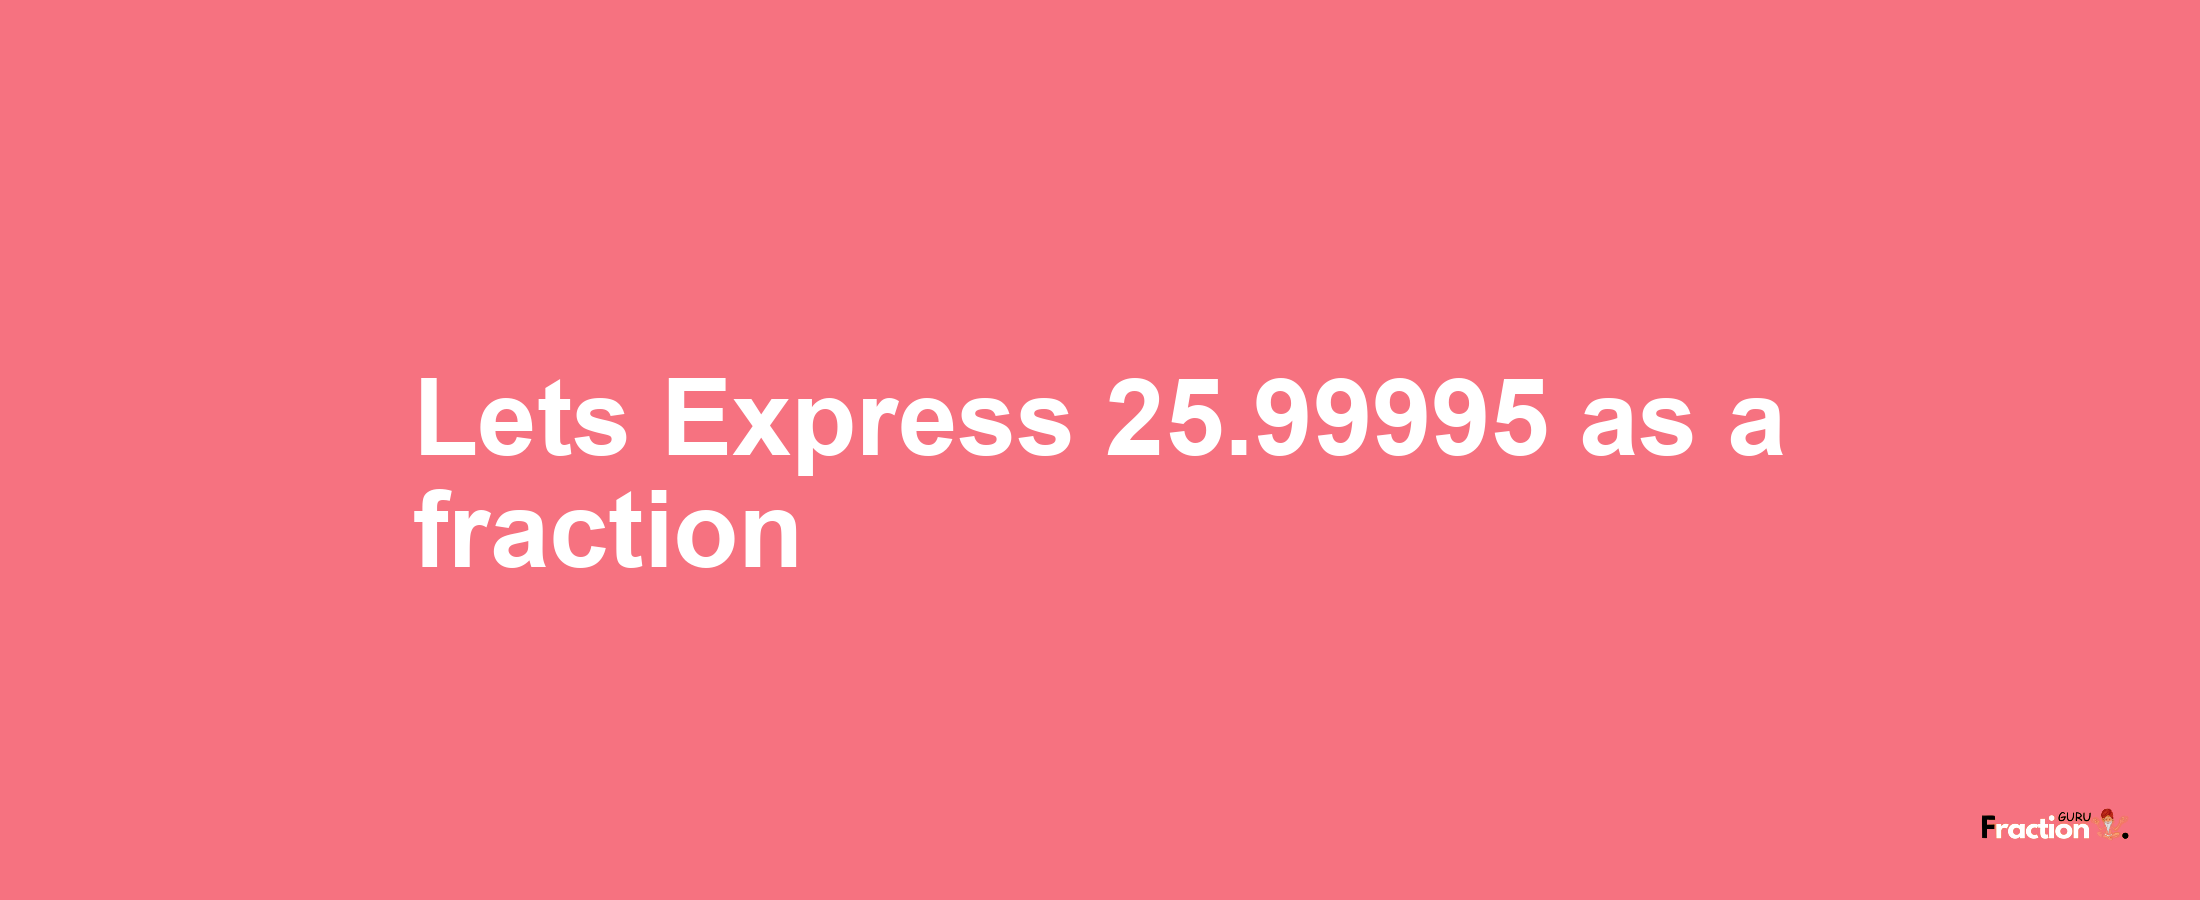 Lets Express 25.99995 as afraction